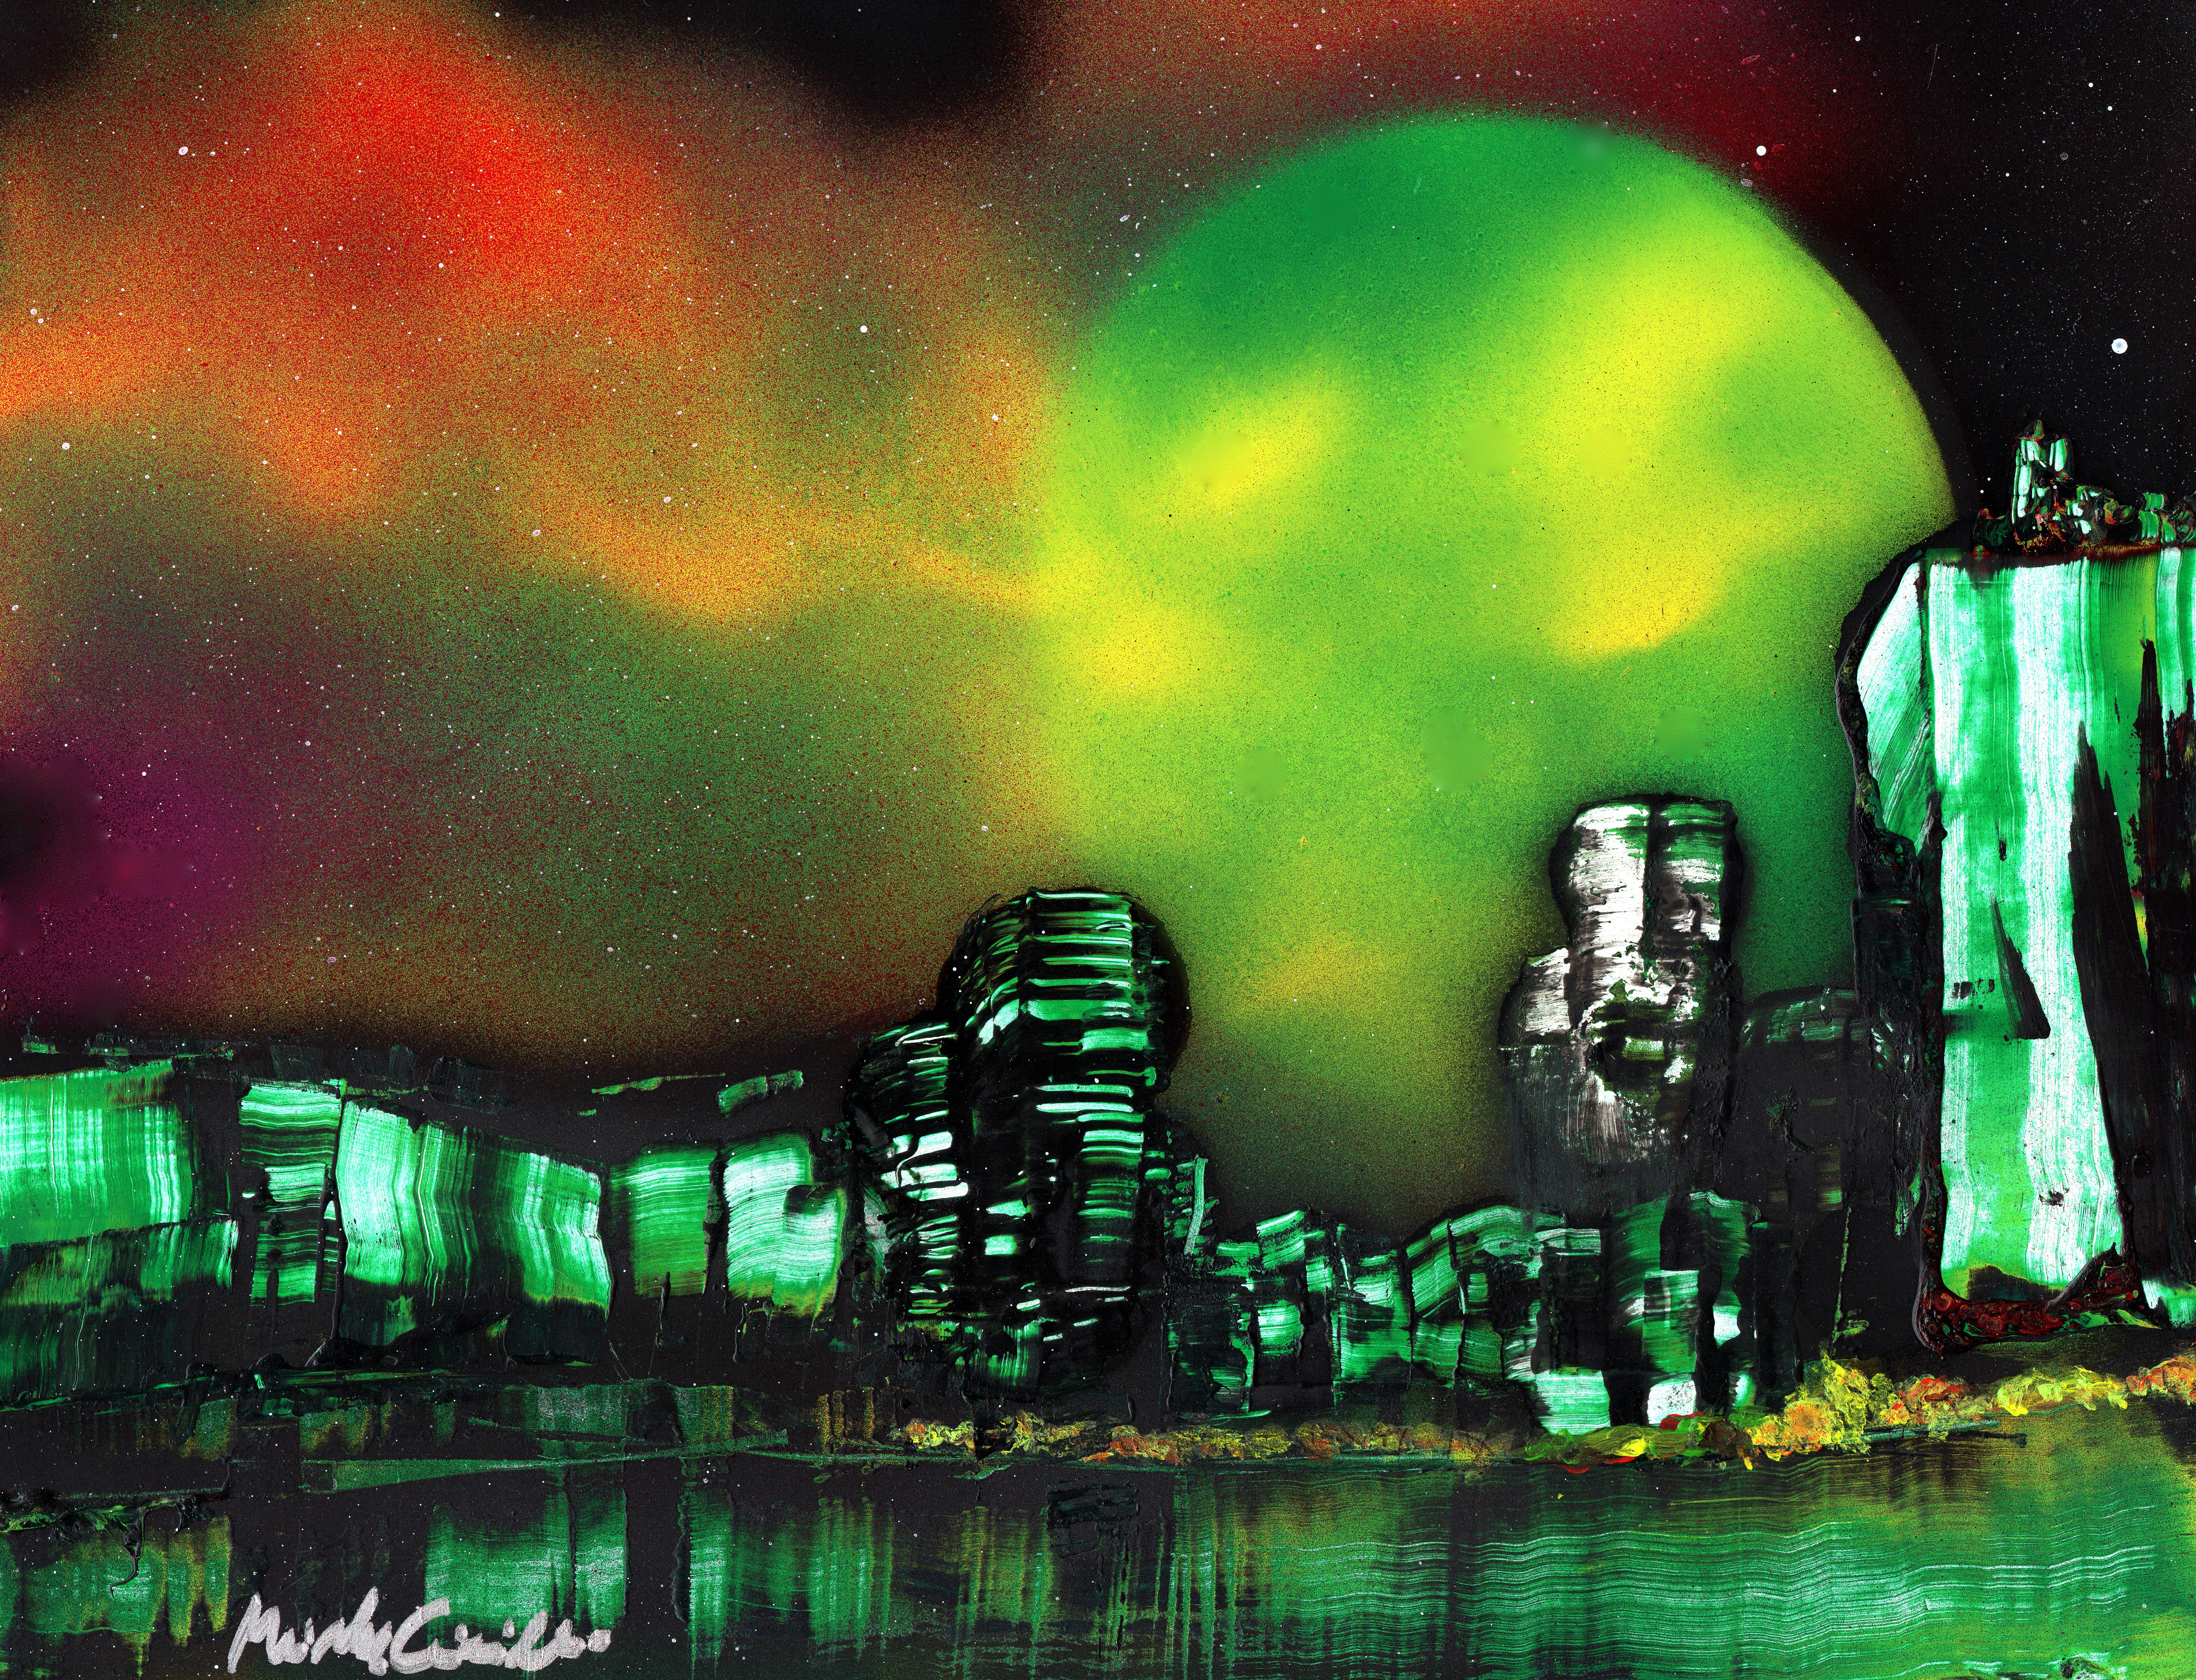 Mike Cicirelli; Emerald Moon, 2017, Original Painting Acrylic, 8.5 x 11 inches. Artwork description: 241 A large moon balances a Cityscape with life- giving green and mists of orange spirit.  Painted with spray, brush and acrylic on 11x8. 5 heavy weight acid- free flat board, its an original painting perfectly suited for mat framing.  ...